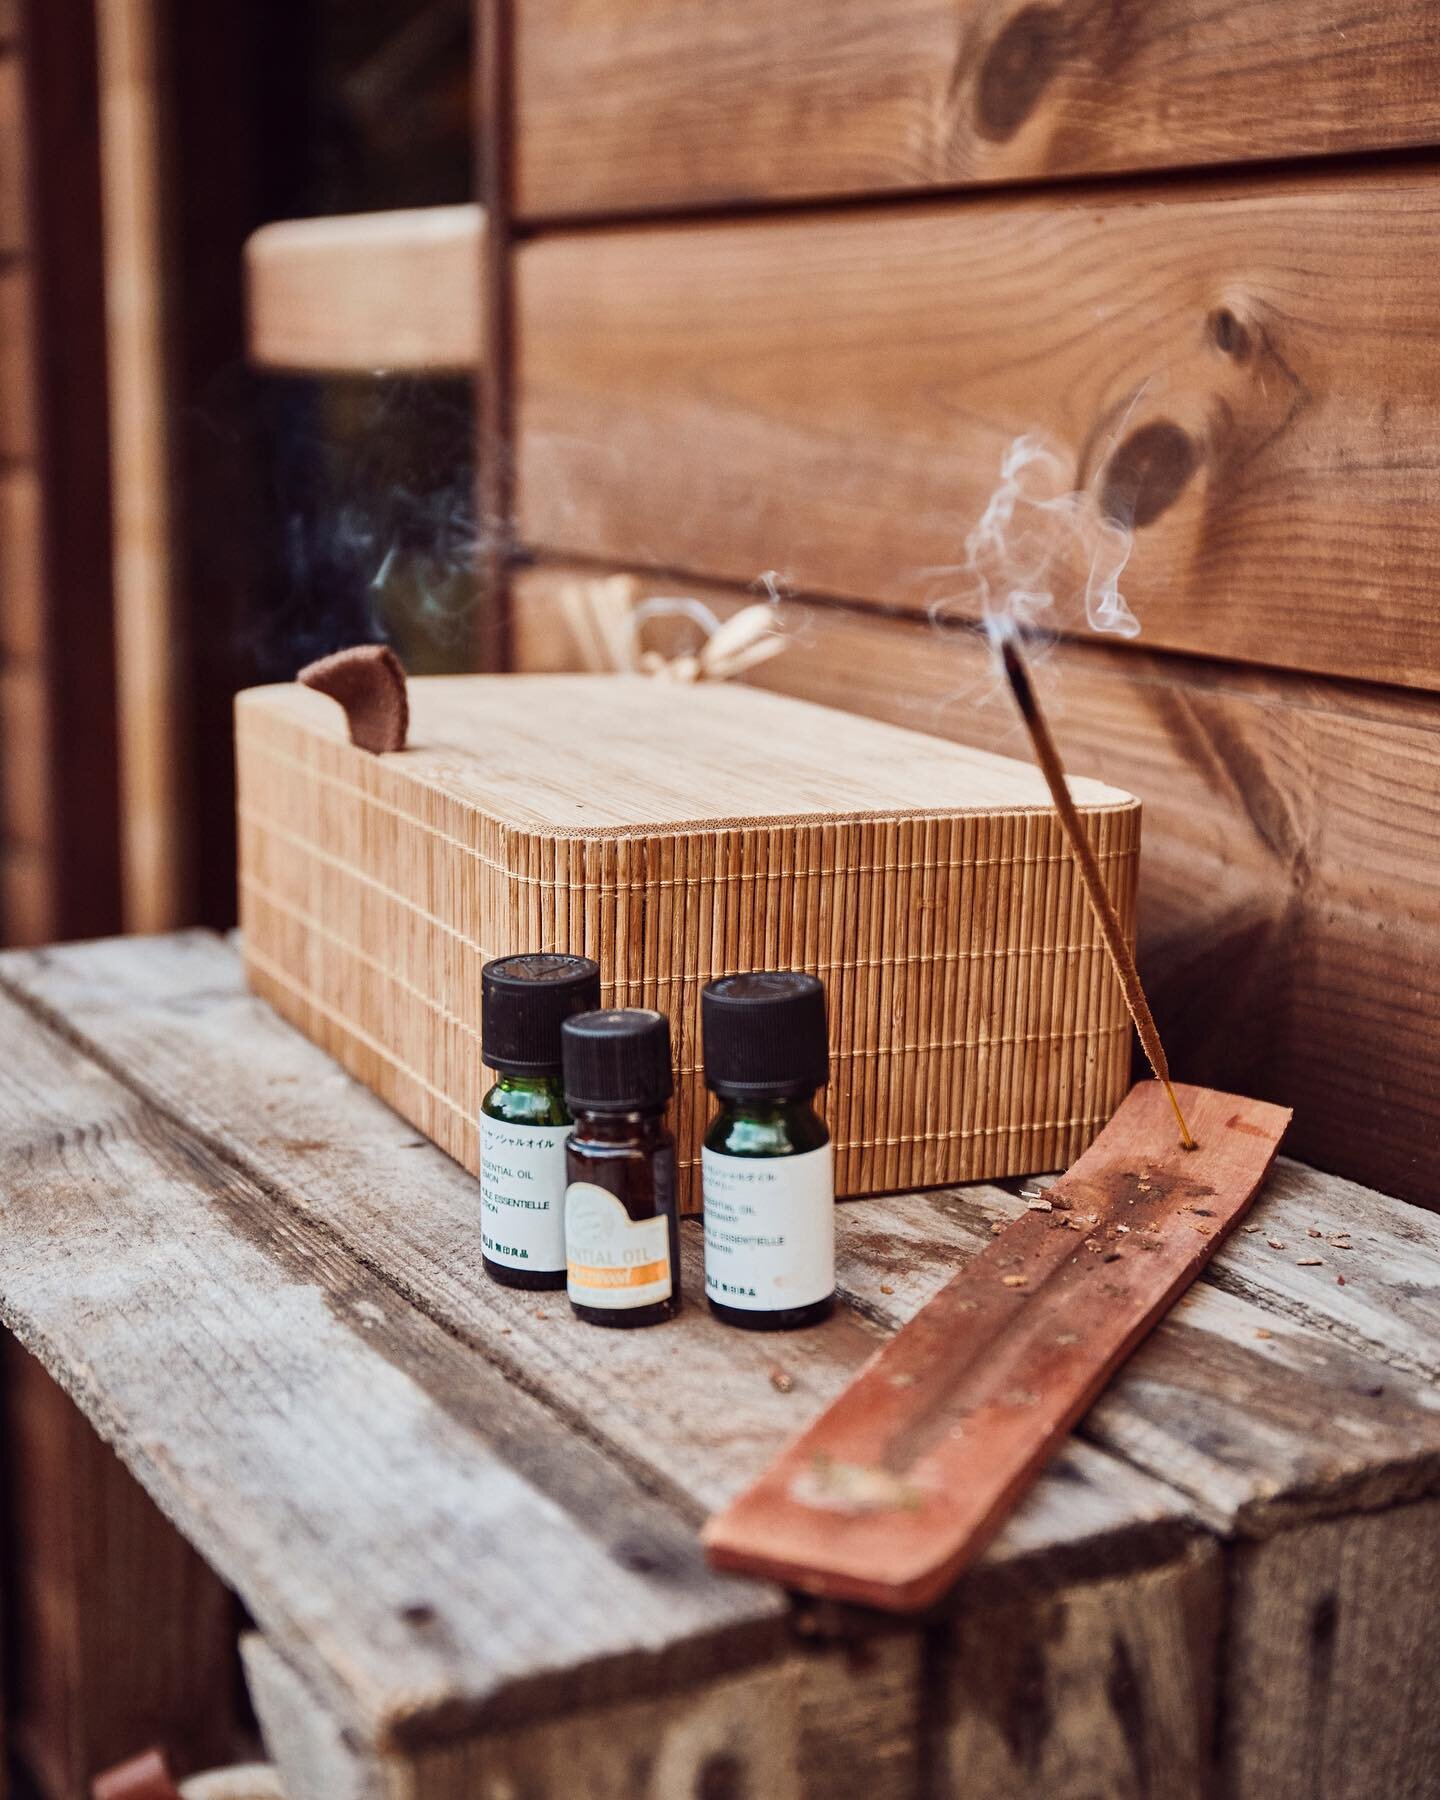 Oils in the sauna. ♨️

Our steams are becoming one of the little touches that keep bringing you back to us and really adds to the experience.
.
We have a whole box of oils and love to take you on a journey with the aromas which can be so therapeutic.